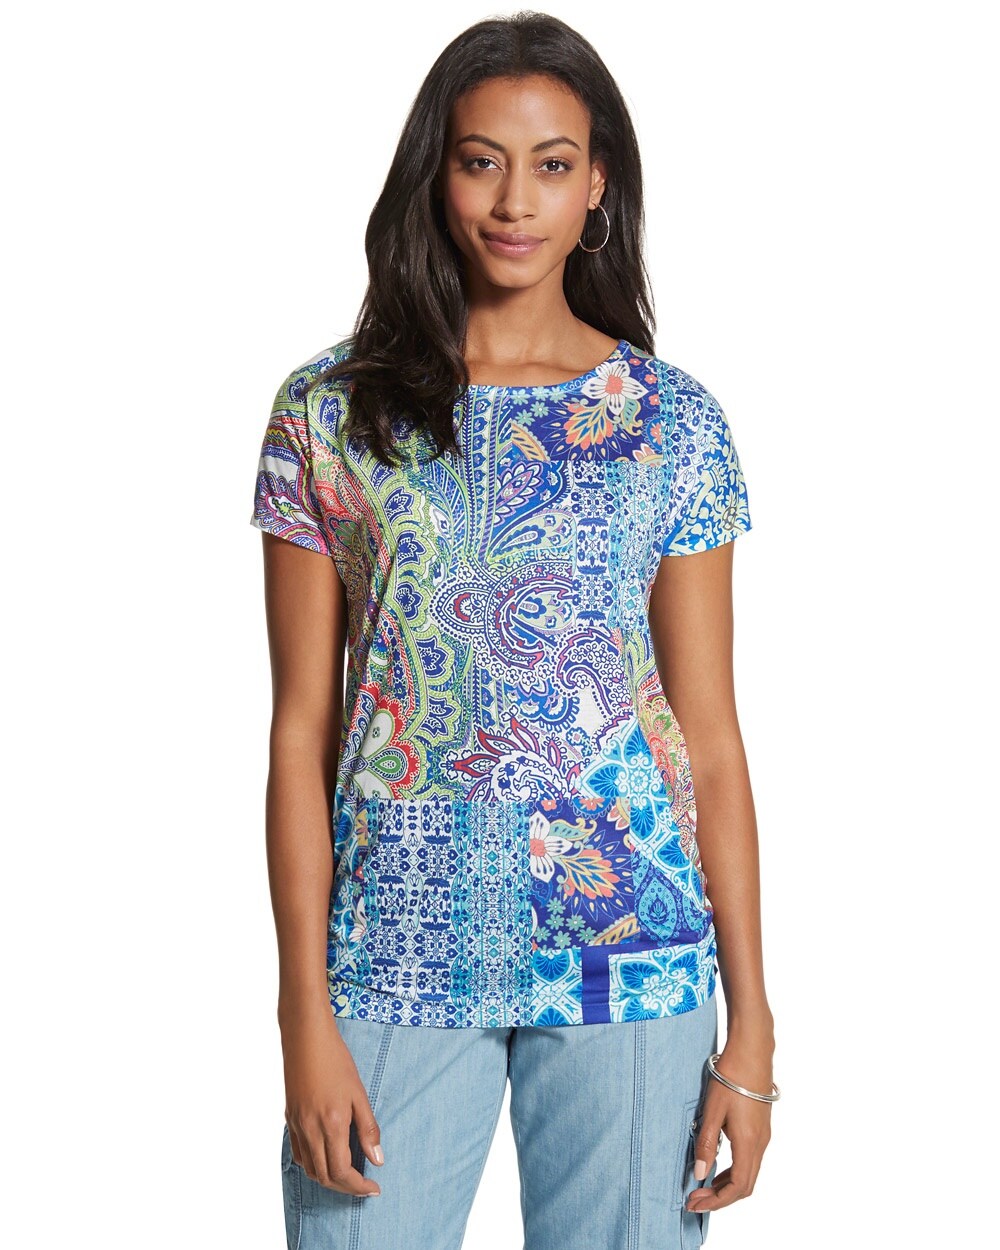 Mixed Pattern Top - Women's New Clothing - Tops, Bottoms & Accessories ...